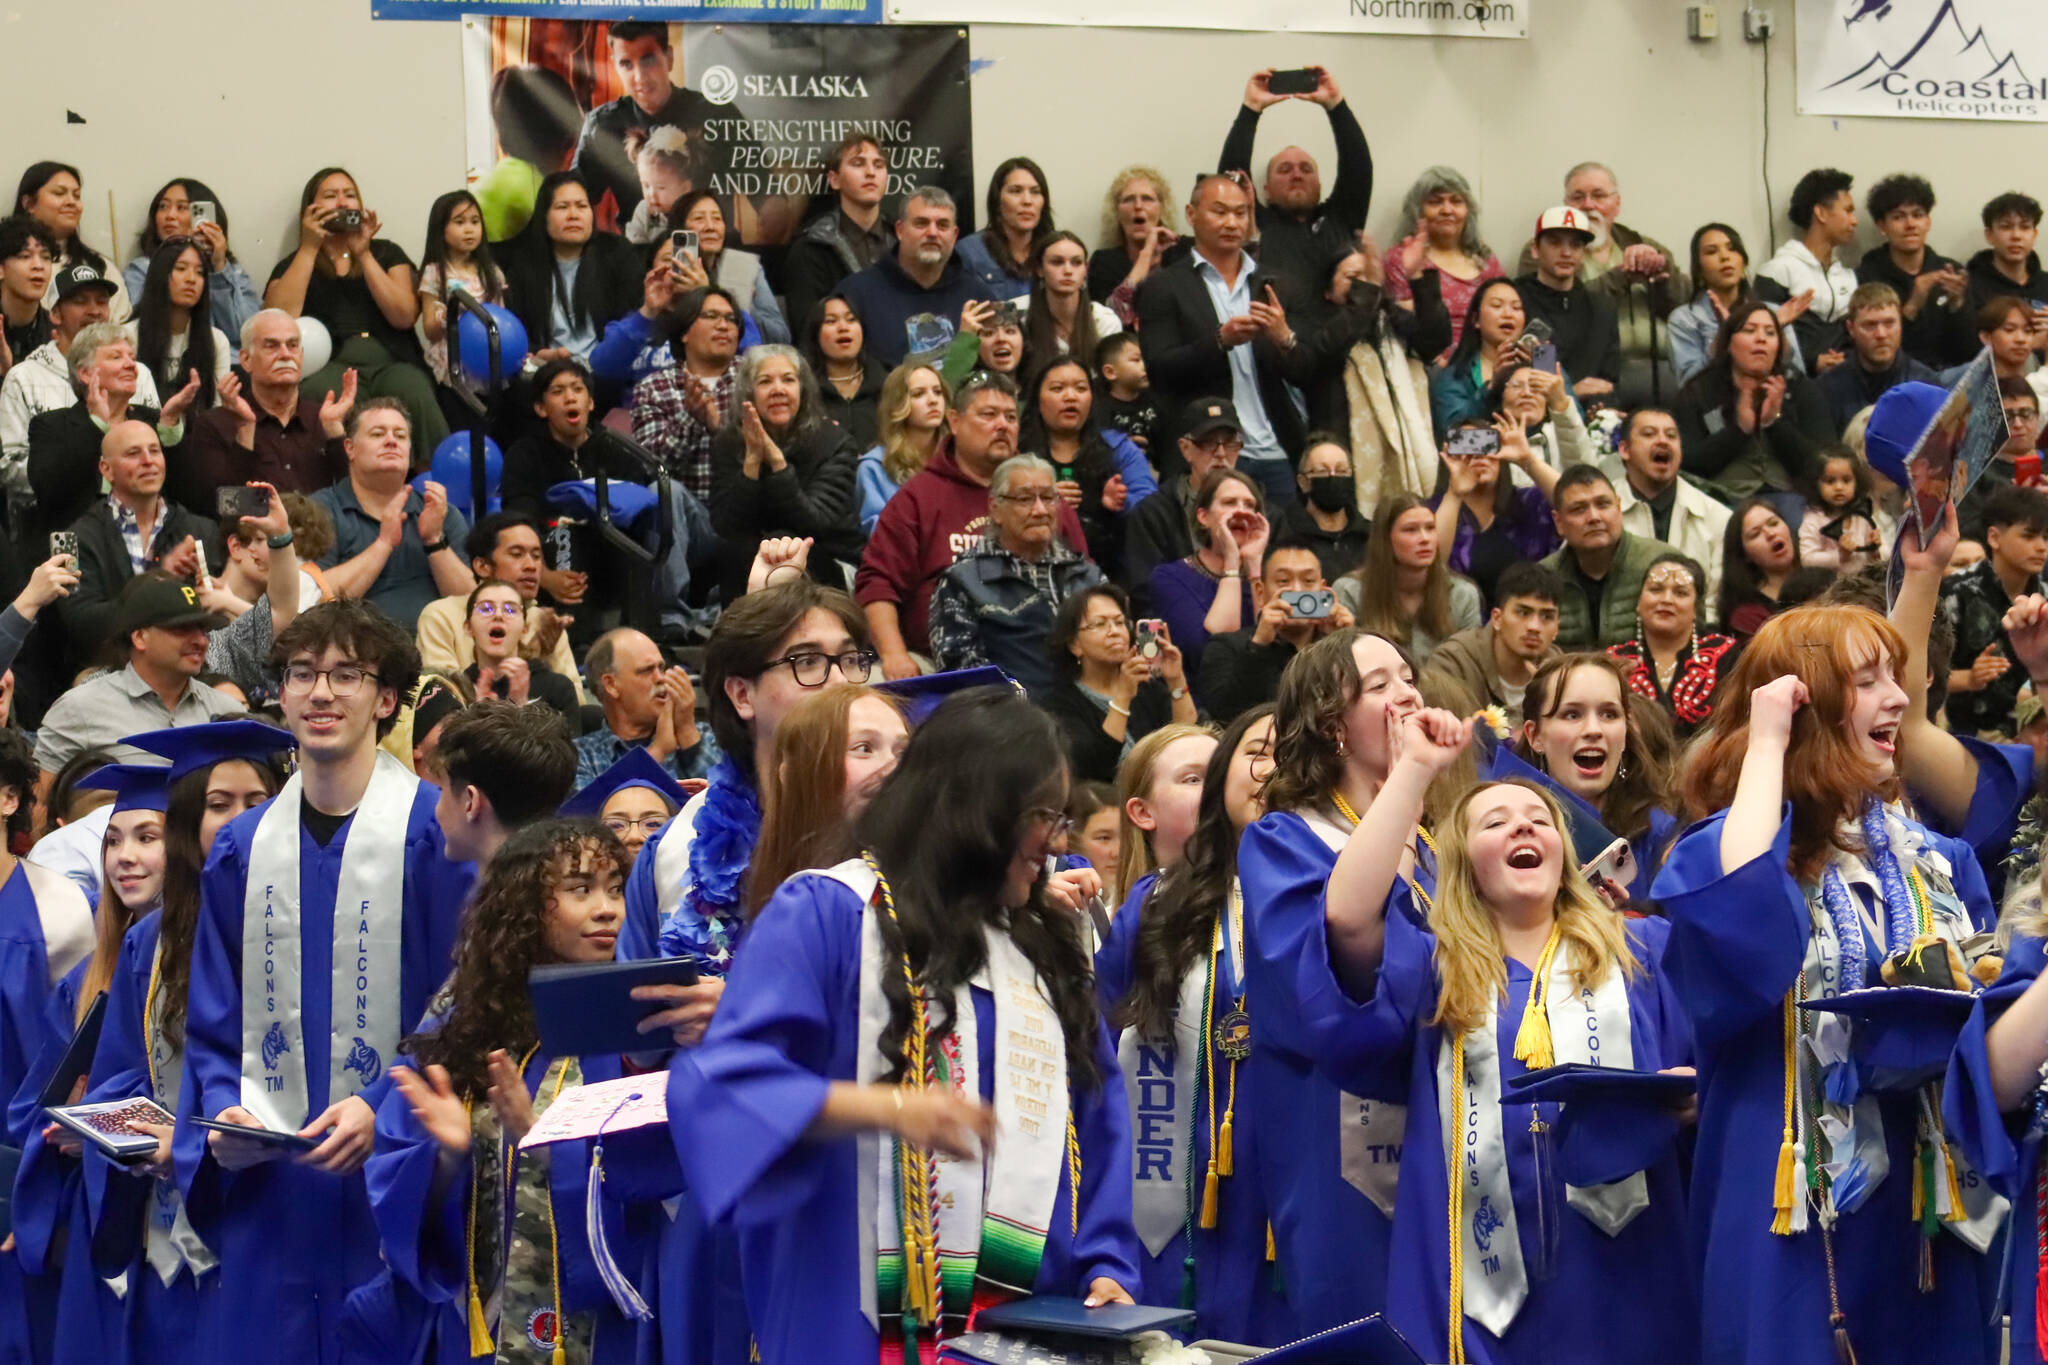 Thunder Mountain High School graduates celebrate after moving their tassels to the left, their newly received diplomas in hand, at the end of Sunday’s commencement ceremony. (Jasz Garrett / Juneau Empire)